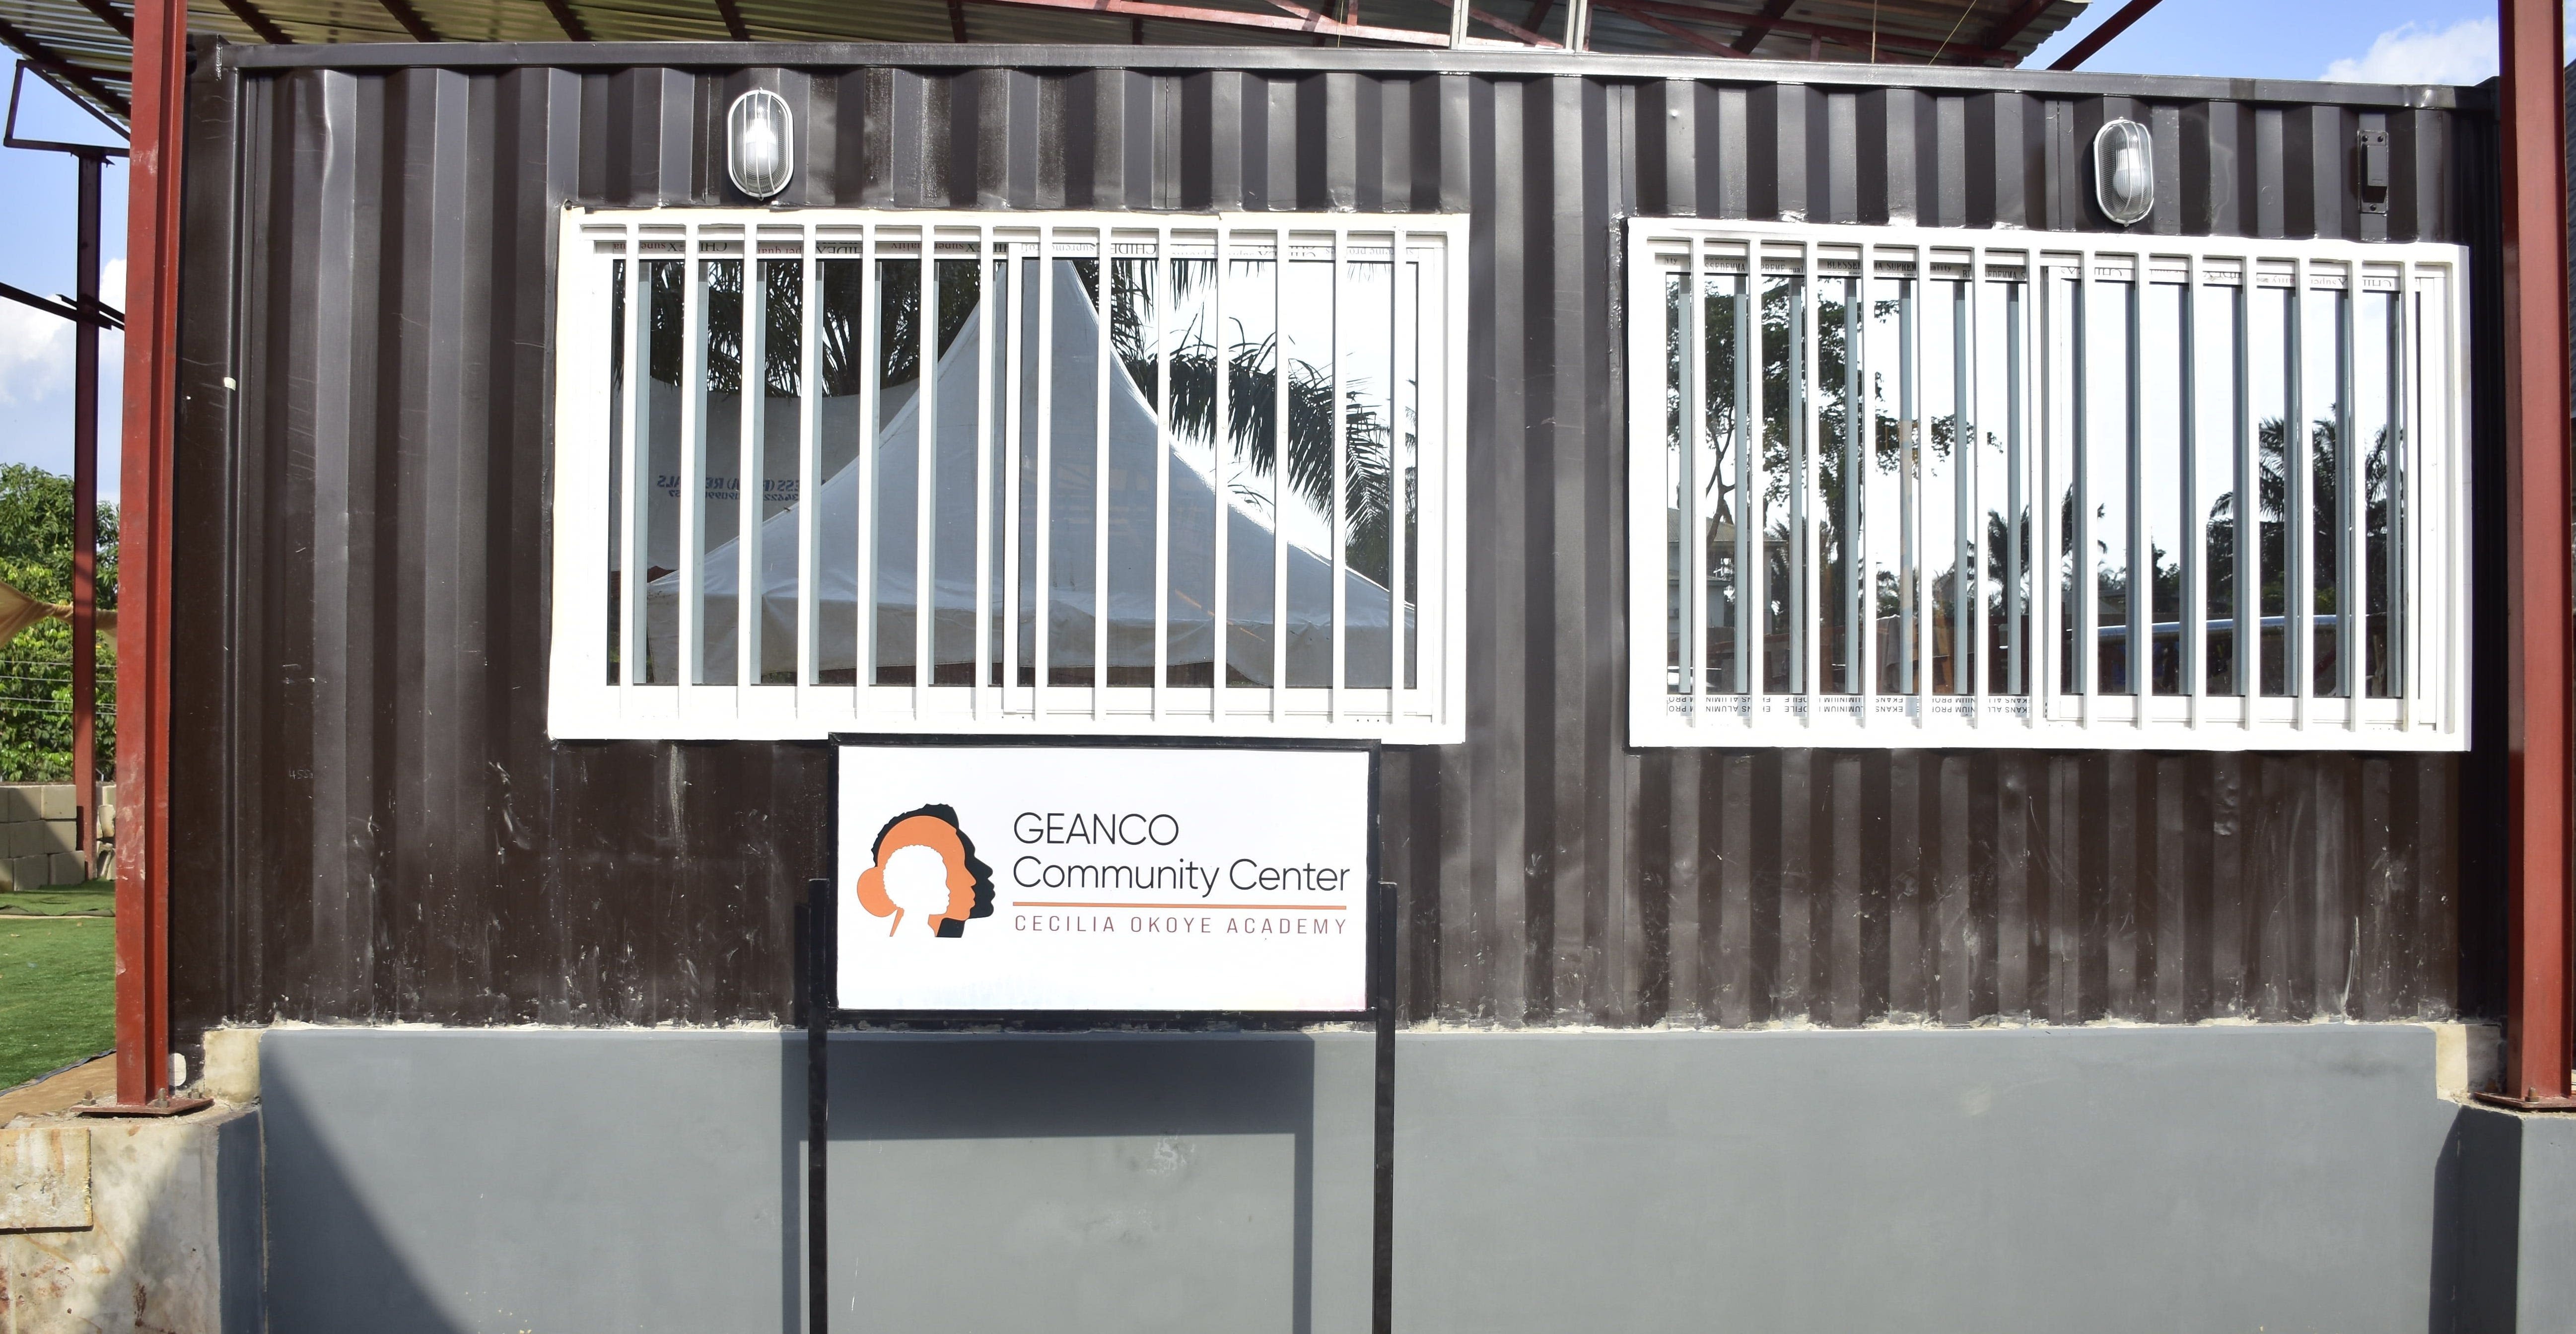 Nickel: The Antetokounmpo foundation partners with GEANCO to open community center in Nigeria